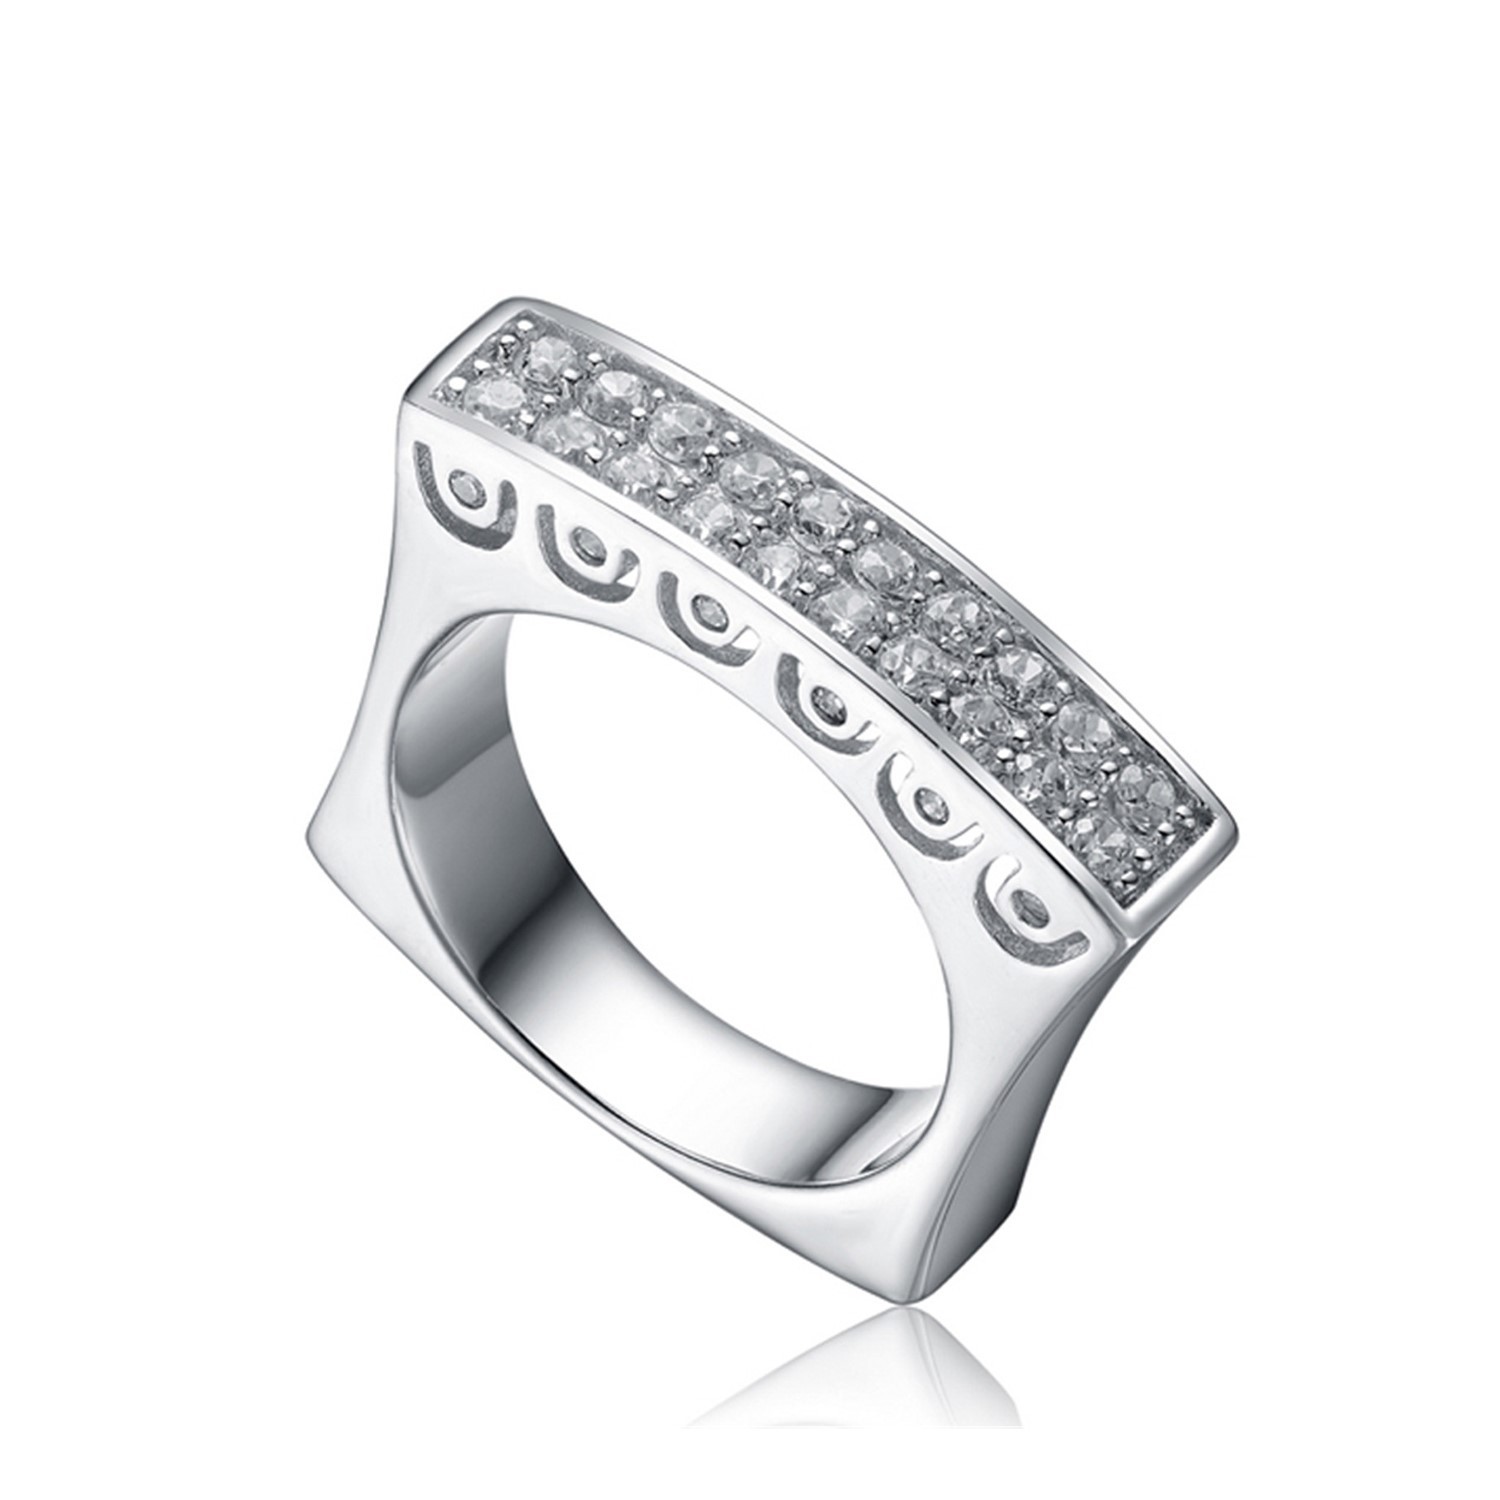 Fashion Simple Style Square Ring Cubic Zircon 925 silver Engagement Jewelry Women Wedding ring